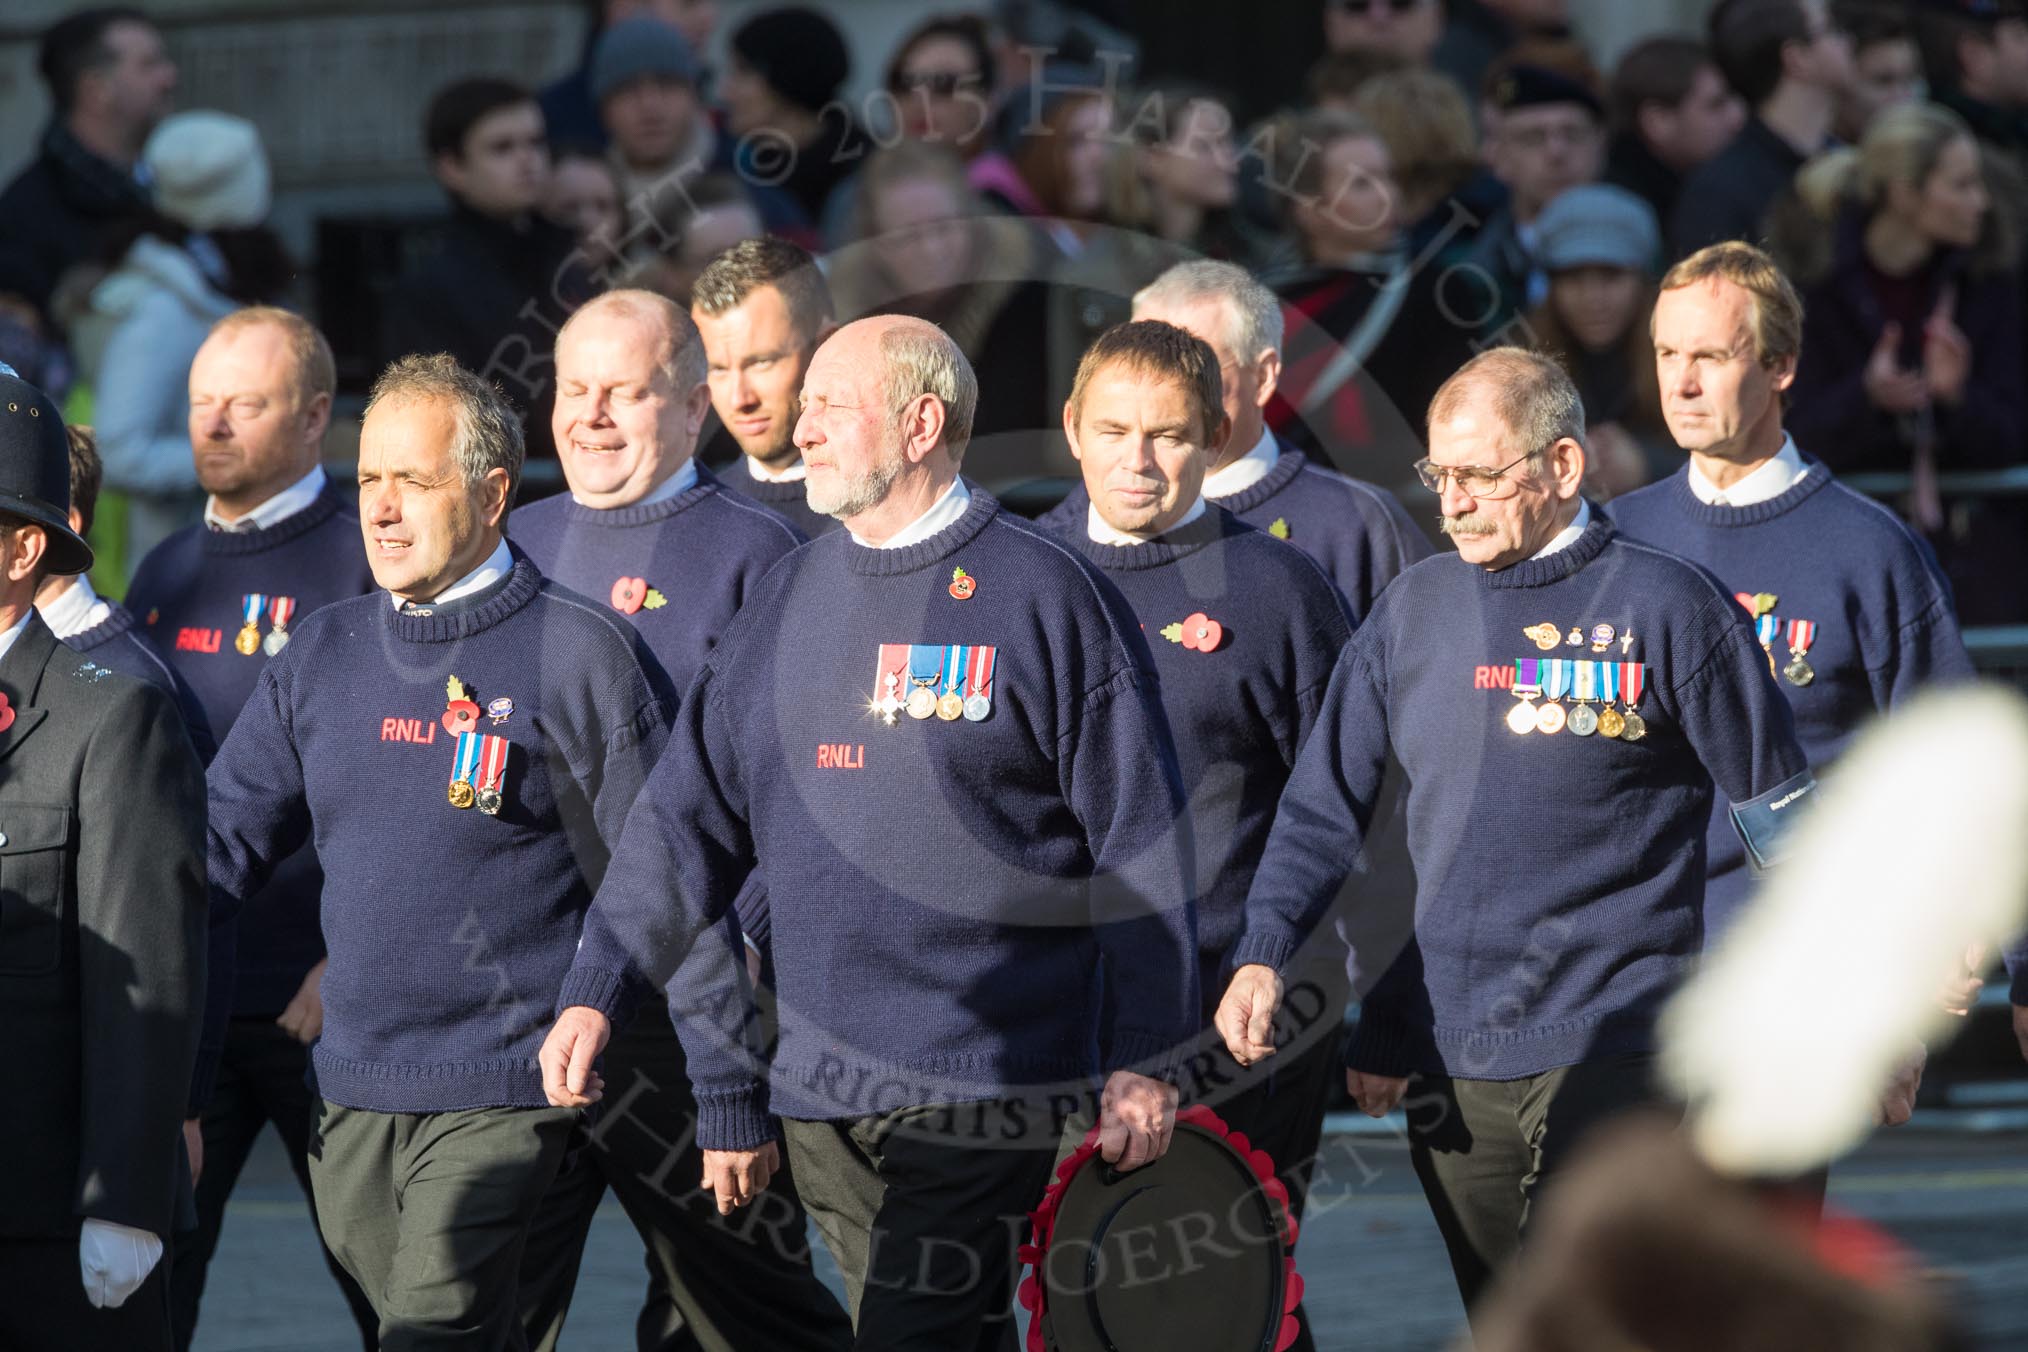 March Past, Remembrance Sunday at the Cenotaph 2016: M41 Royal National Lifeboat Institution.
Cenotaph, Whitehall, London SW1,
London,
Greater London,
United Kingdom,
on 13 November 2016 at 13:19, image #2953